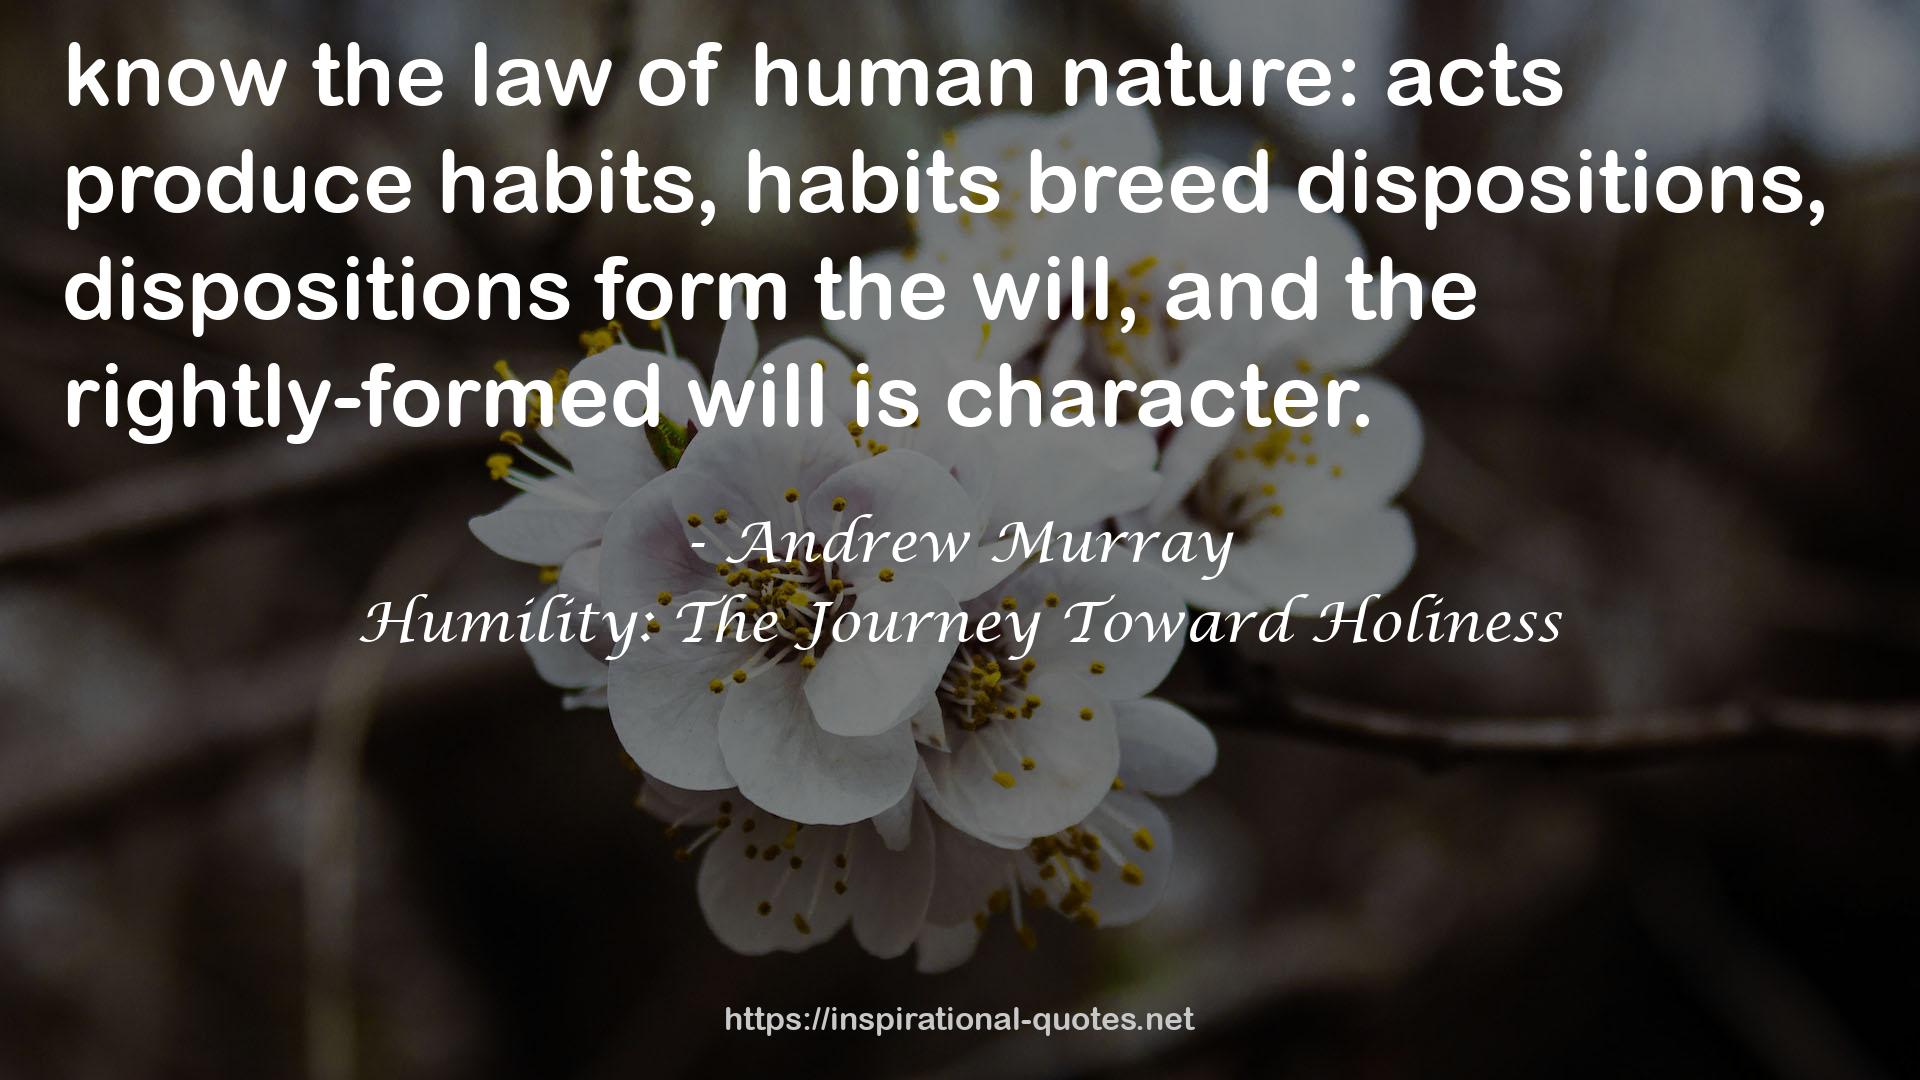 Andrew Murray QUOTES